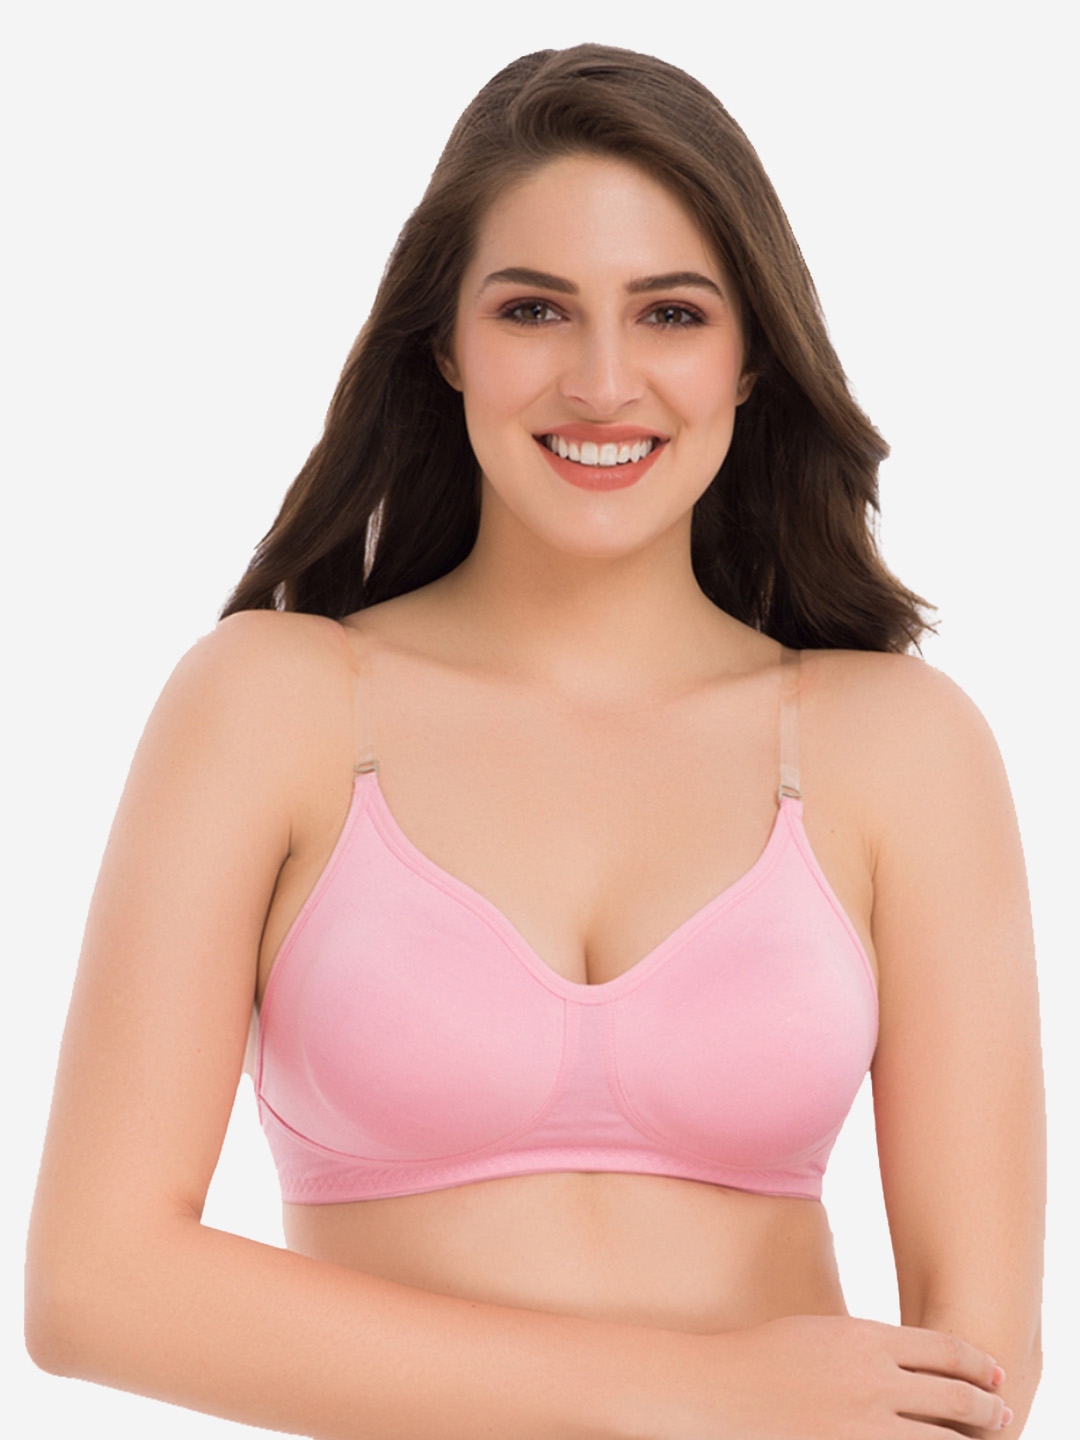 Buy GROVERSONS Paris Beauty Pink Non Padded & Non Wired Cotton Bra